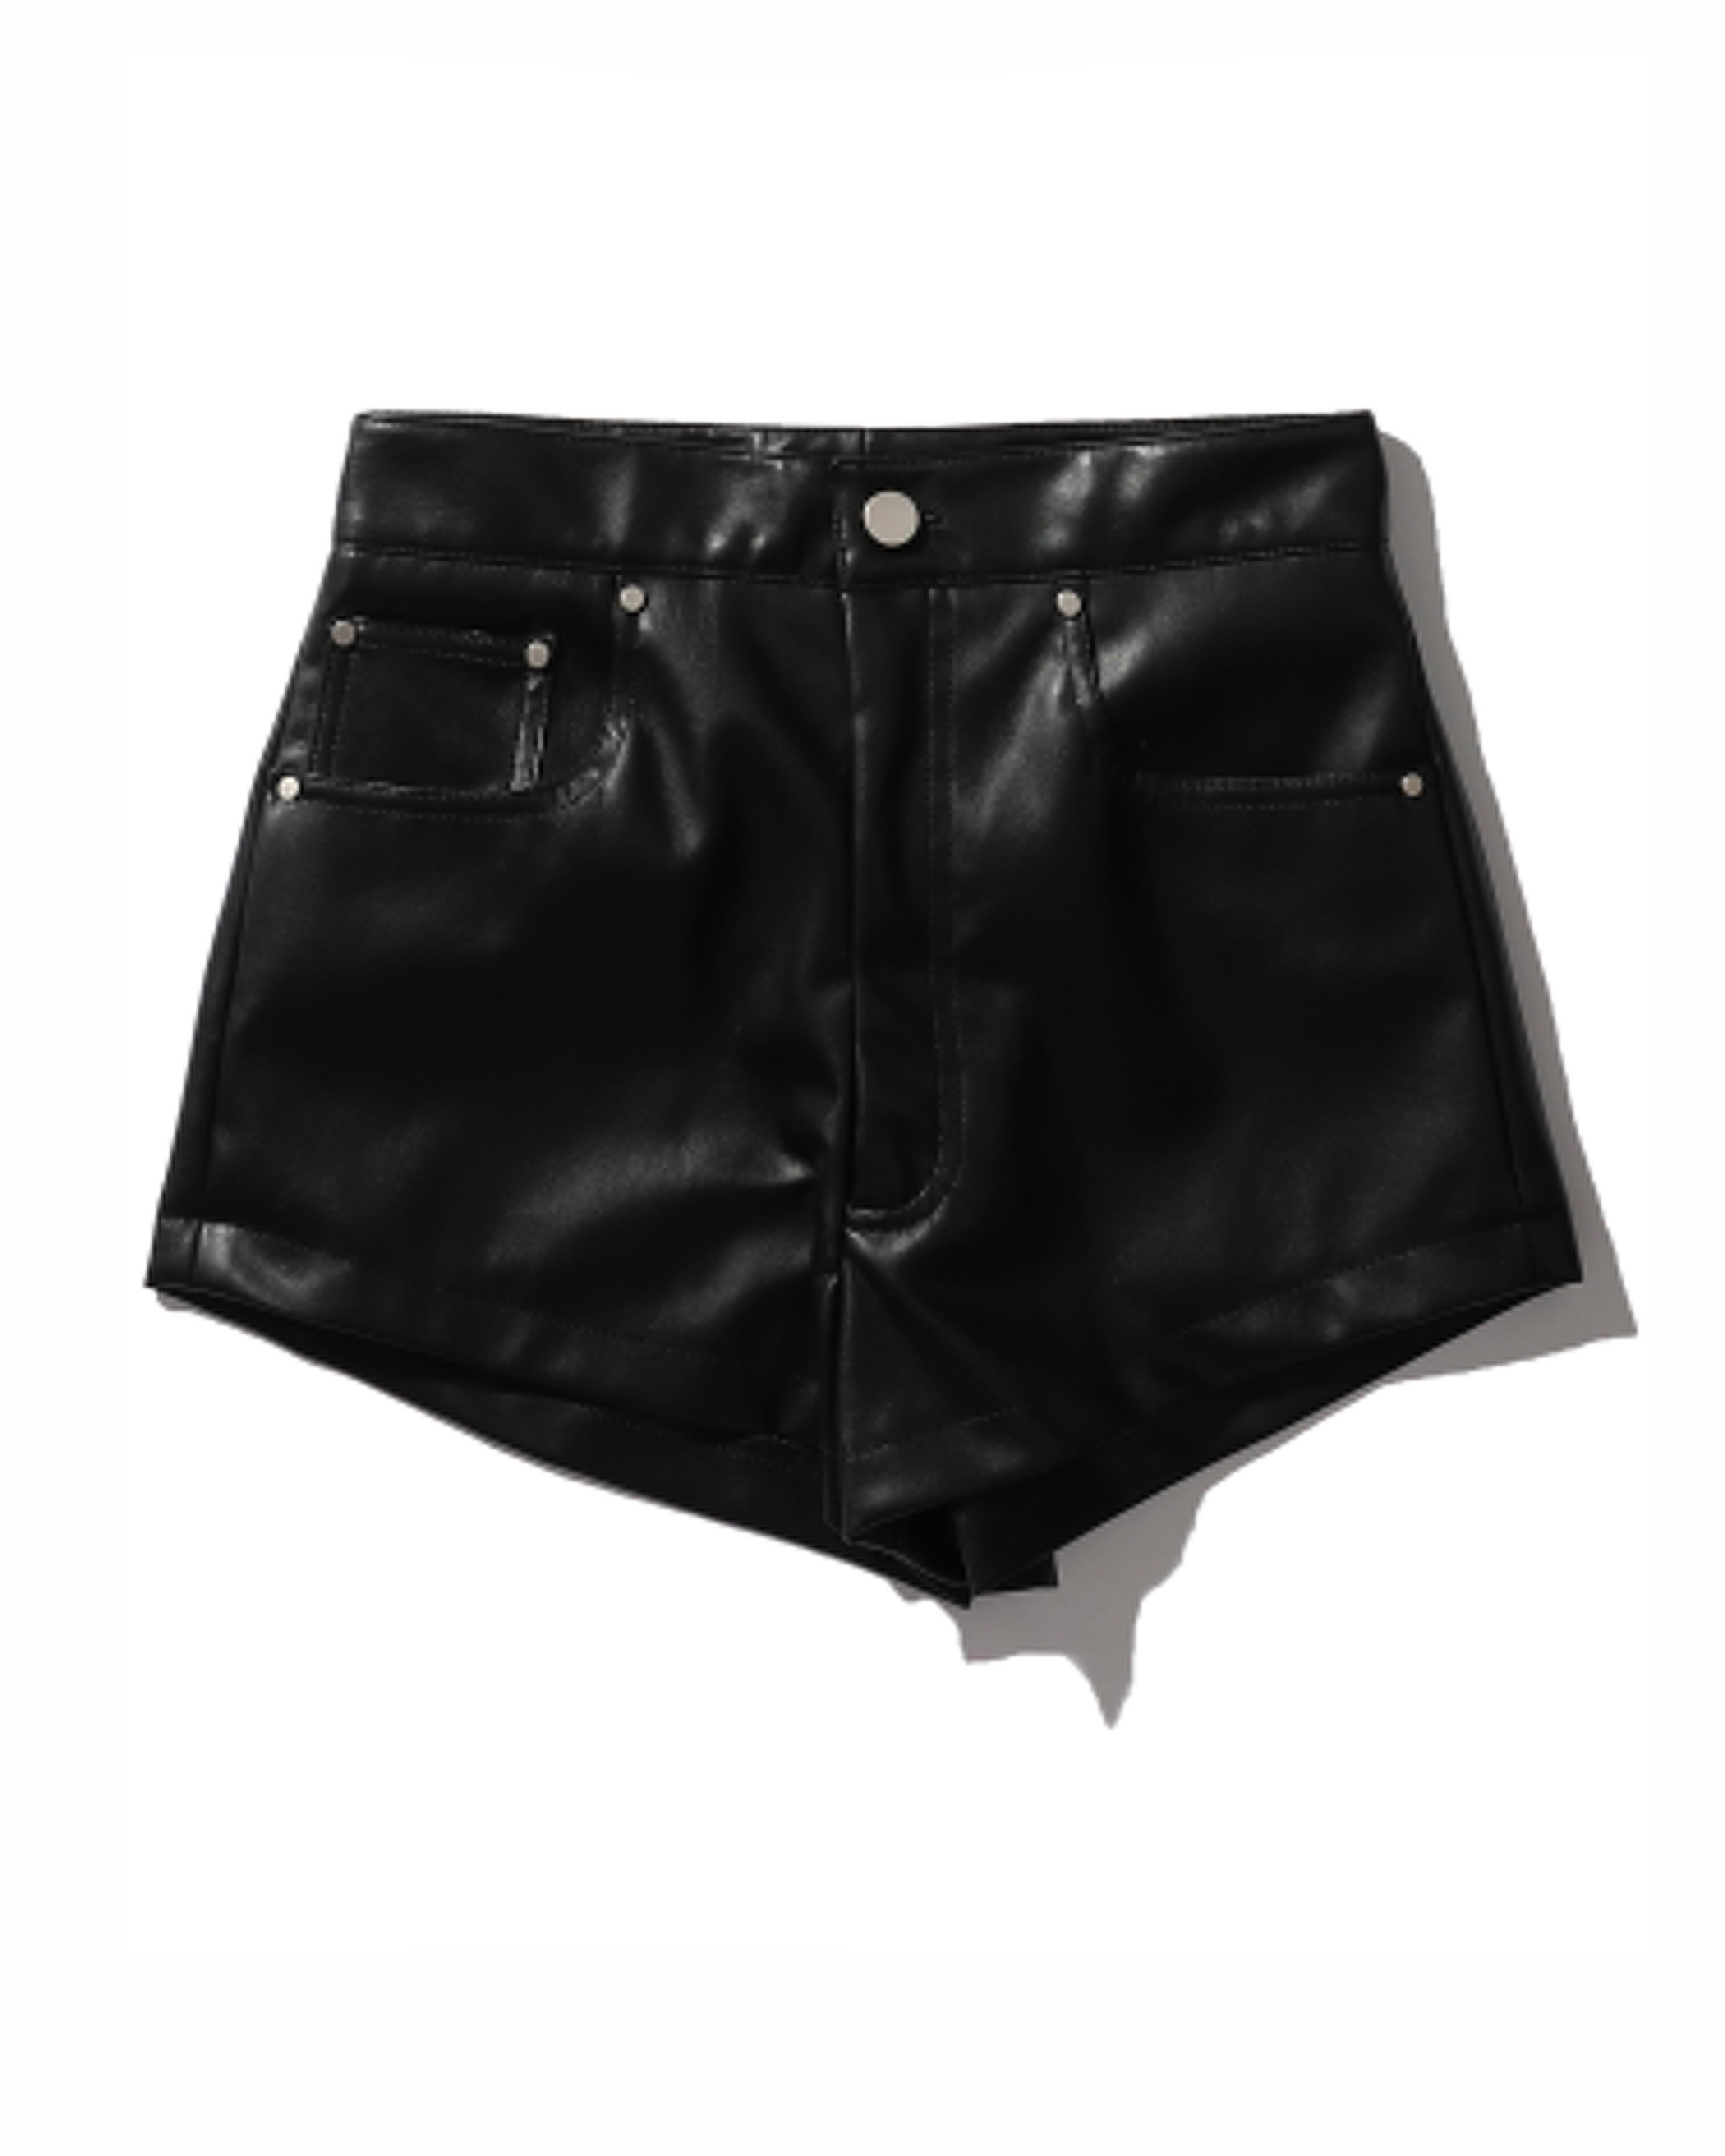 Skinny leather-effect shorts by BLINDNESS